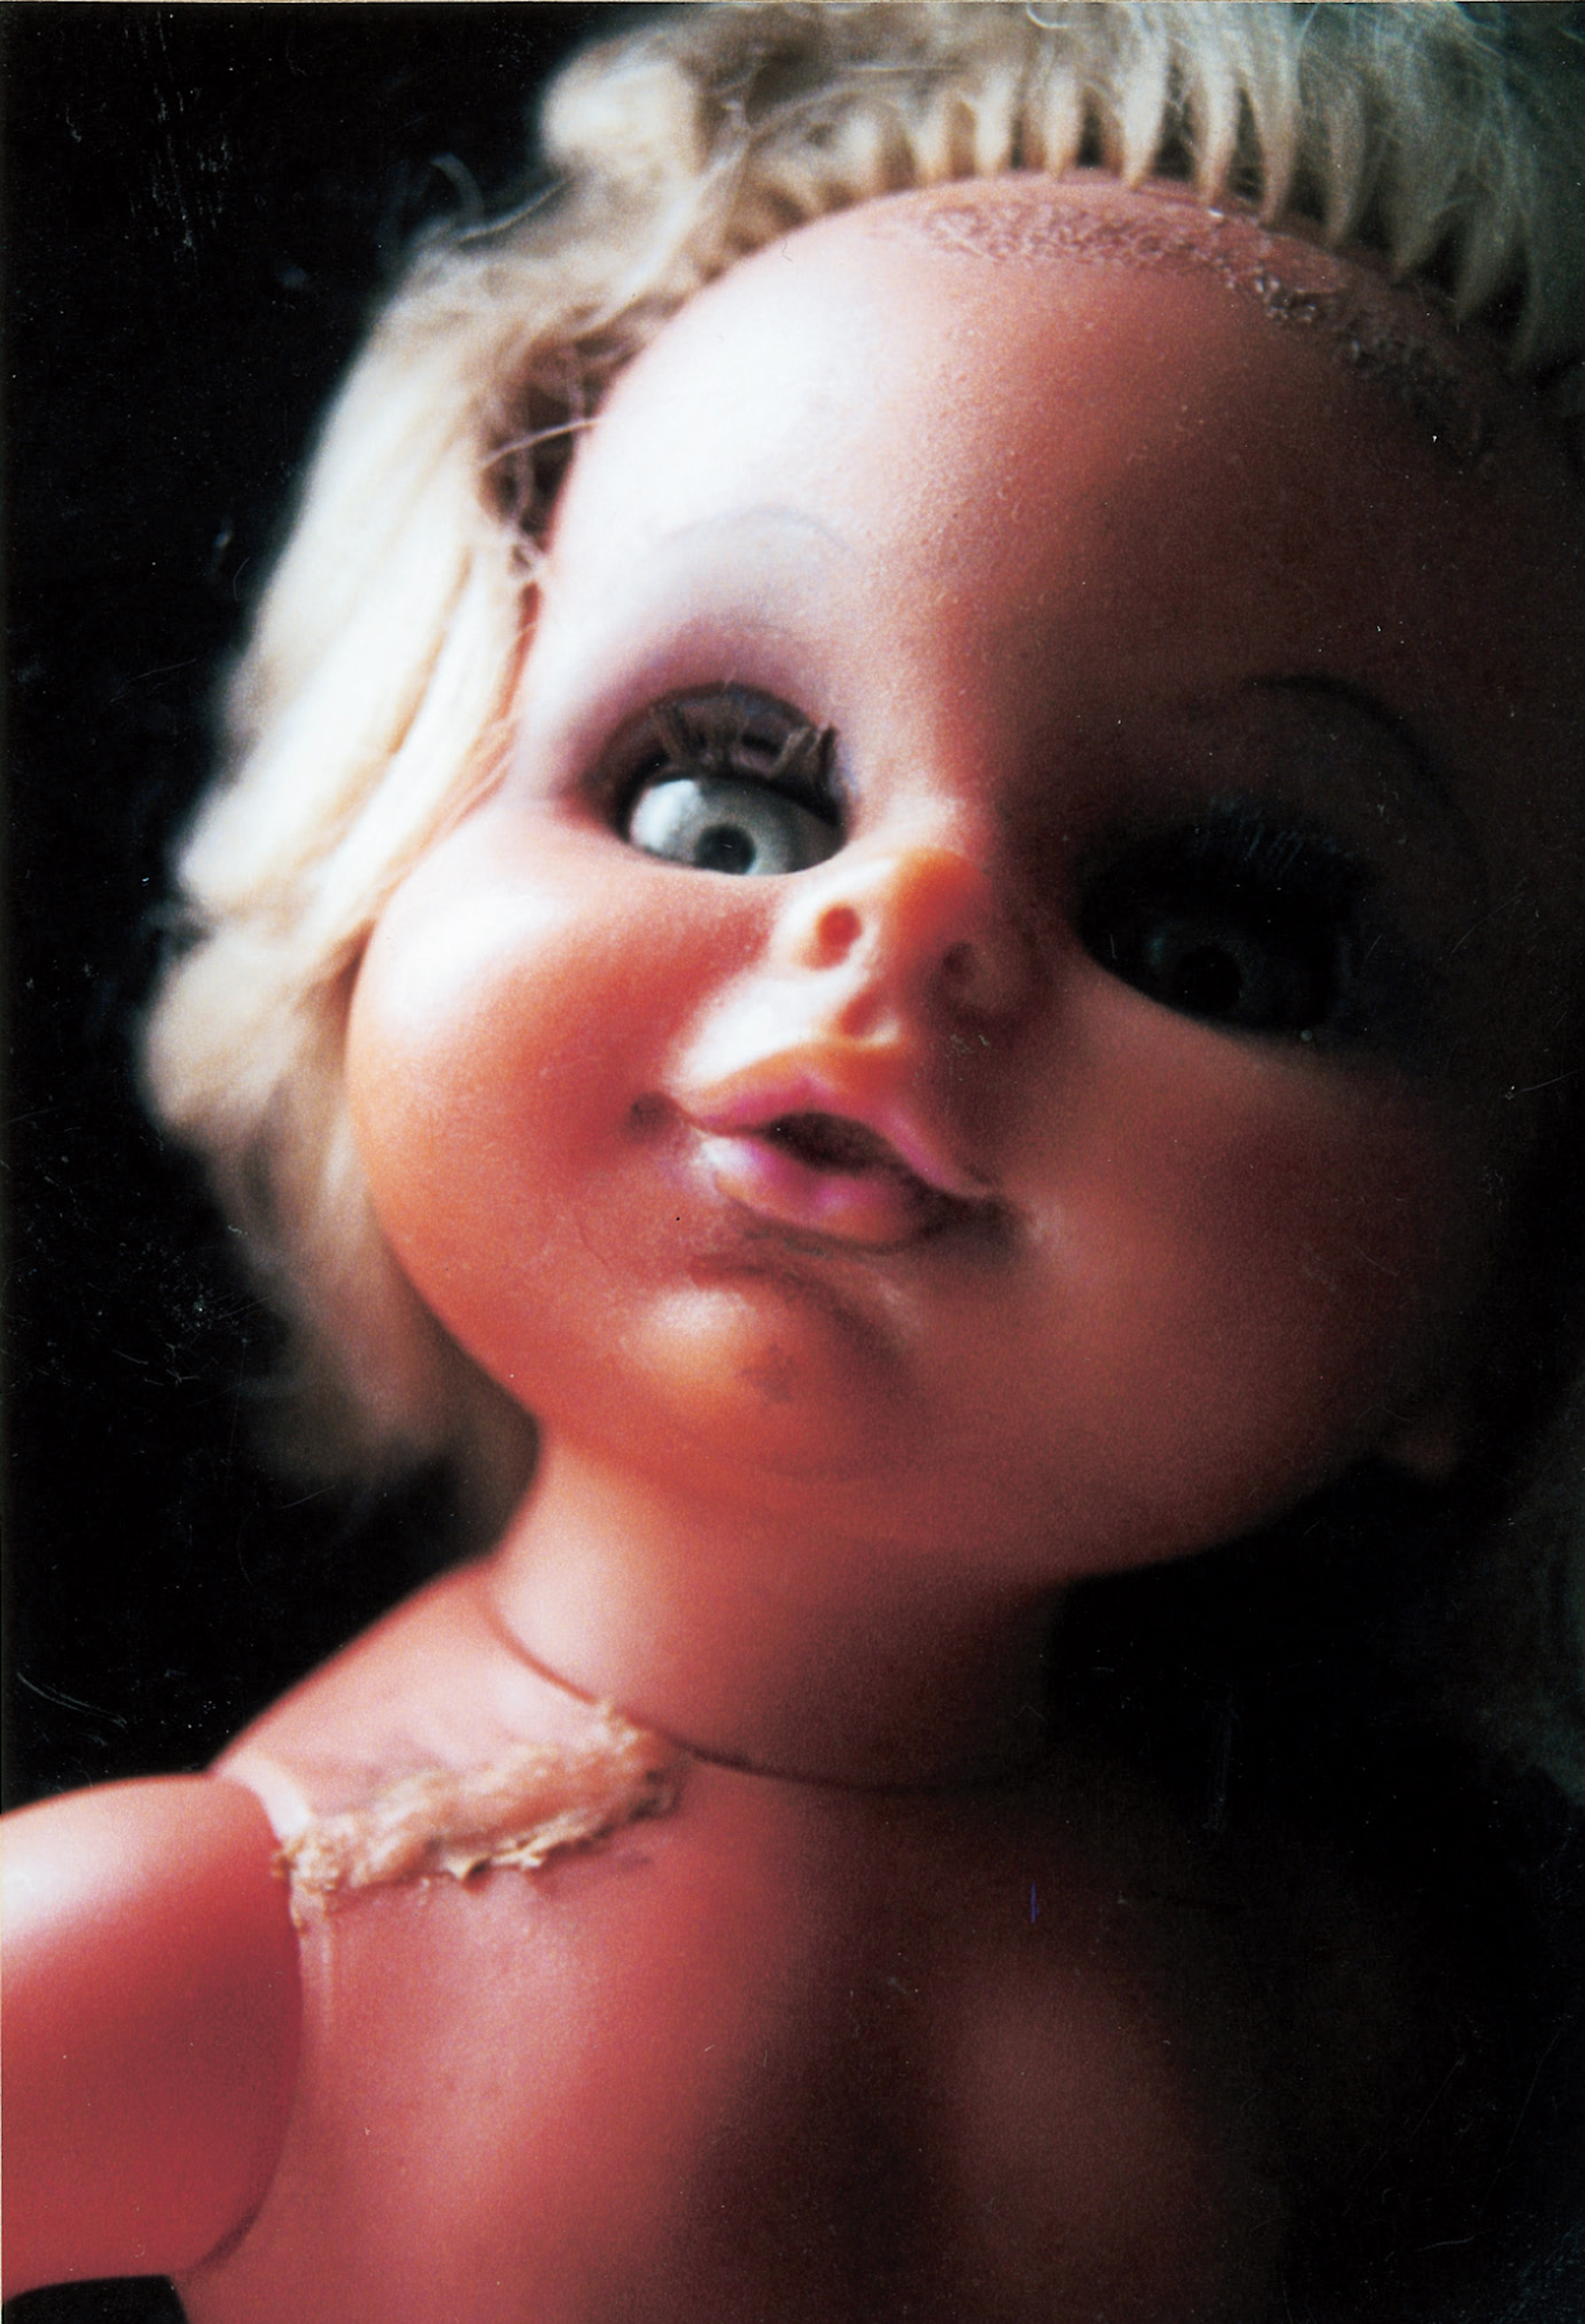 A photograph depicting a close-up detail of a female doll named Matron. The caption reads: The Doll Games’ Sadean baby doll, a cruel voluptuary who presided over the orphanages and boarding schools of the so-called “nasty” games, corrupting virtuous boy dolls and jealously tormenting rivals Aina, Mara, and Melanie. At once mother-substitute and gargantuan infant, Matron was a key element in the Doll Games’ studies of the “maternal grotesque” as well as the “infant whore,” while the surrogate families she ruled became Oedipal laboratories in which the Doll Games conducted many of their boldest experiments.
